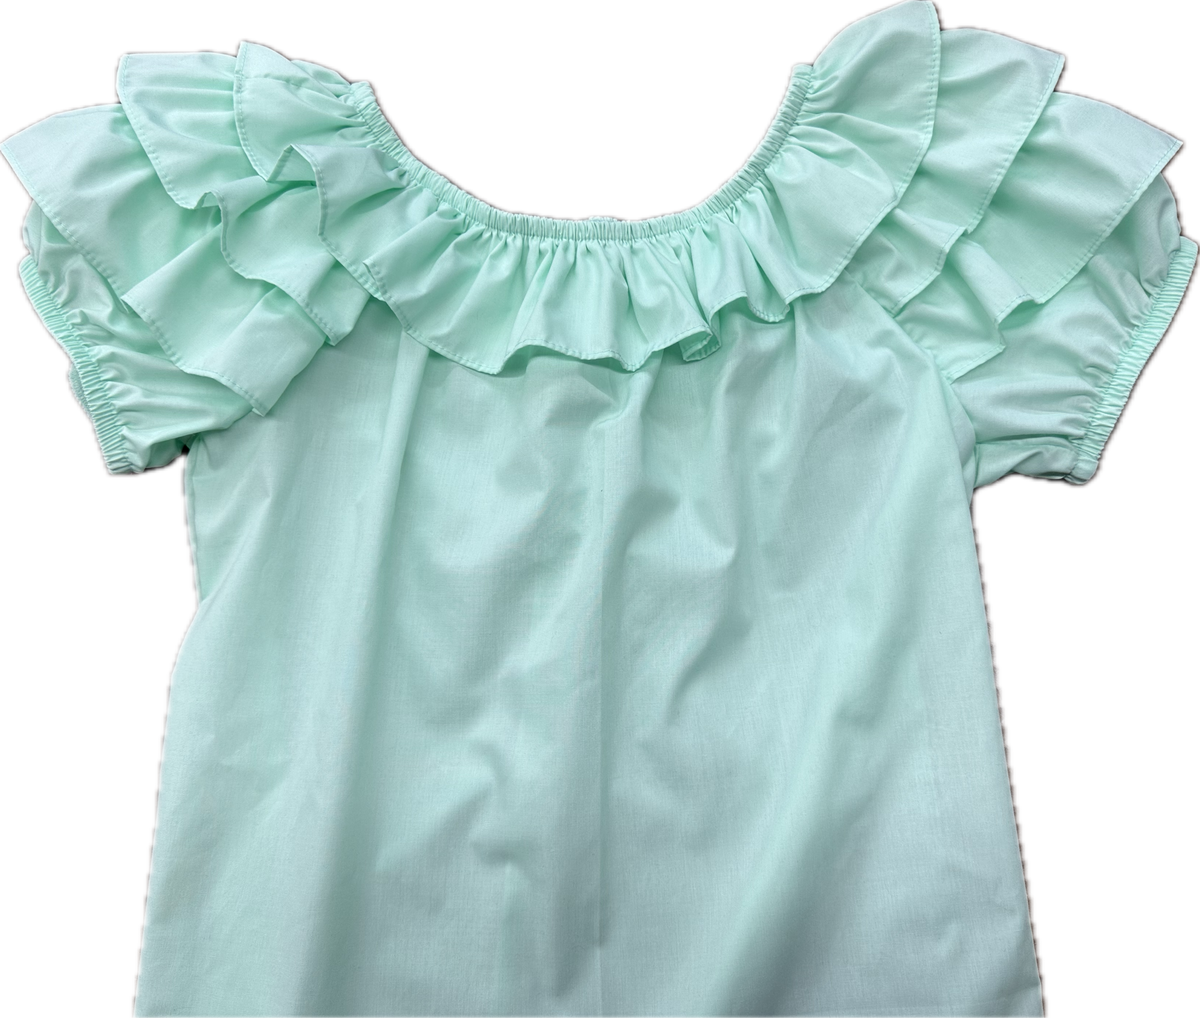 A Triple Ruffle Blouse with mint green color from Square Up Fashions with ruffled sleeves.